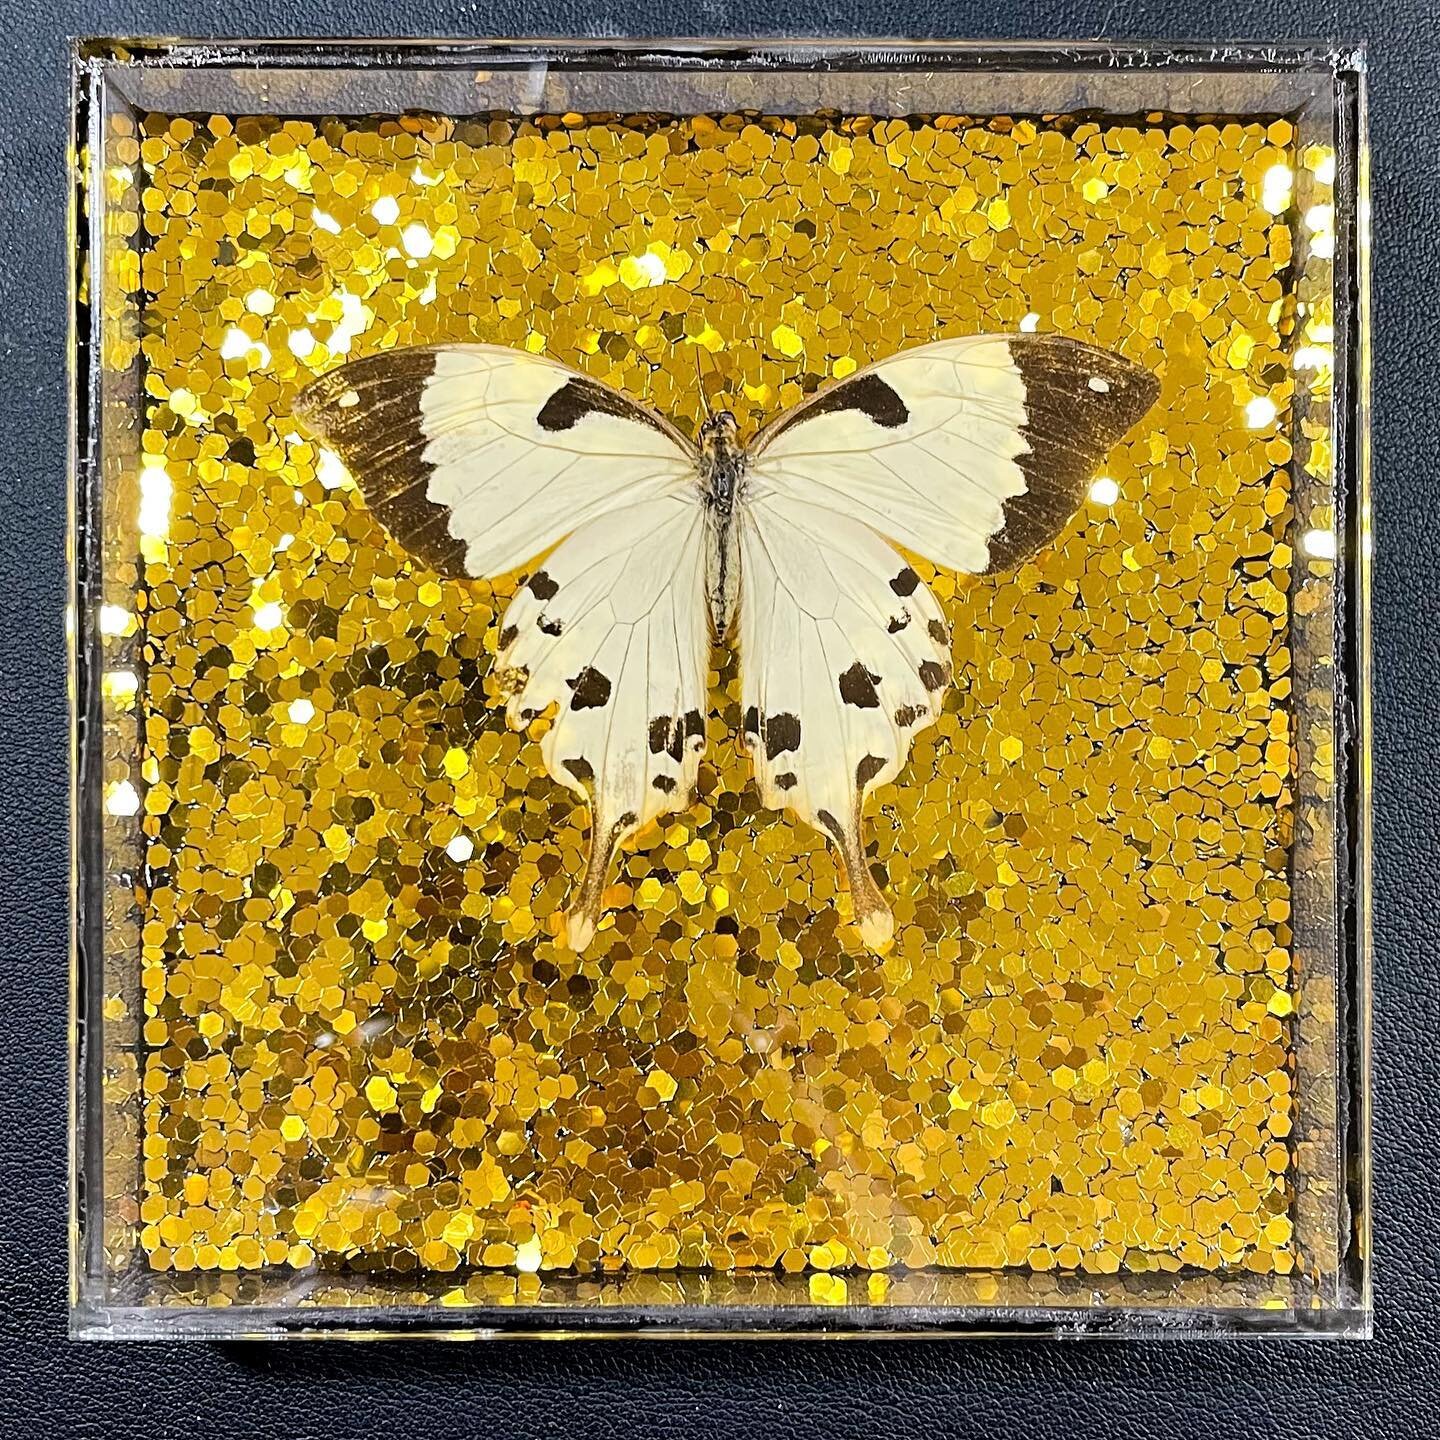 Papillon dardanus meriones on gold glitter in acrylic case 😍 
.
.
.
.
#insectcollector #insecttaxidermy #deadbug #deadbutterfly #butterfly #africanswallowtail #customart #goldglitter #femaleartist #texasartist